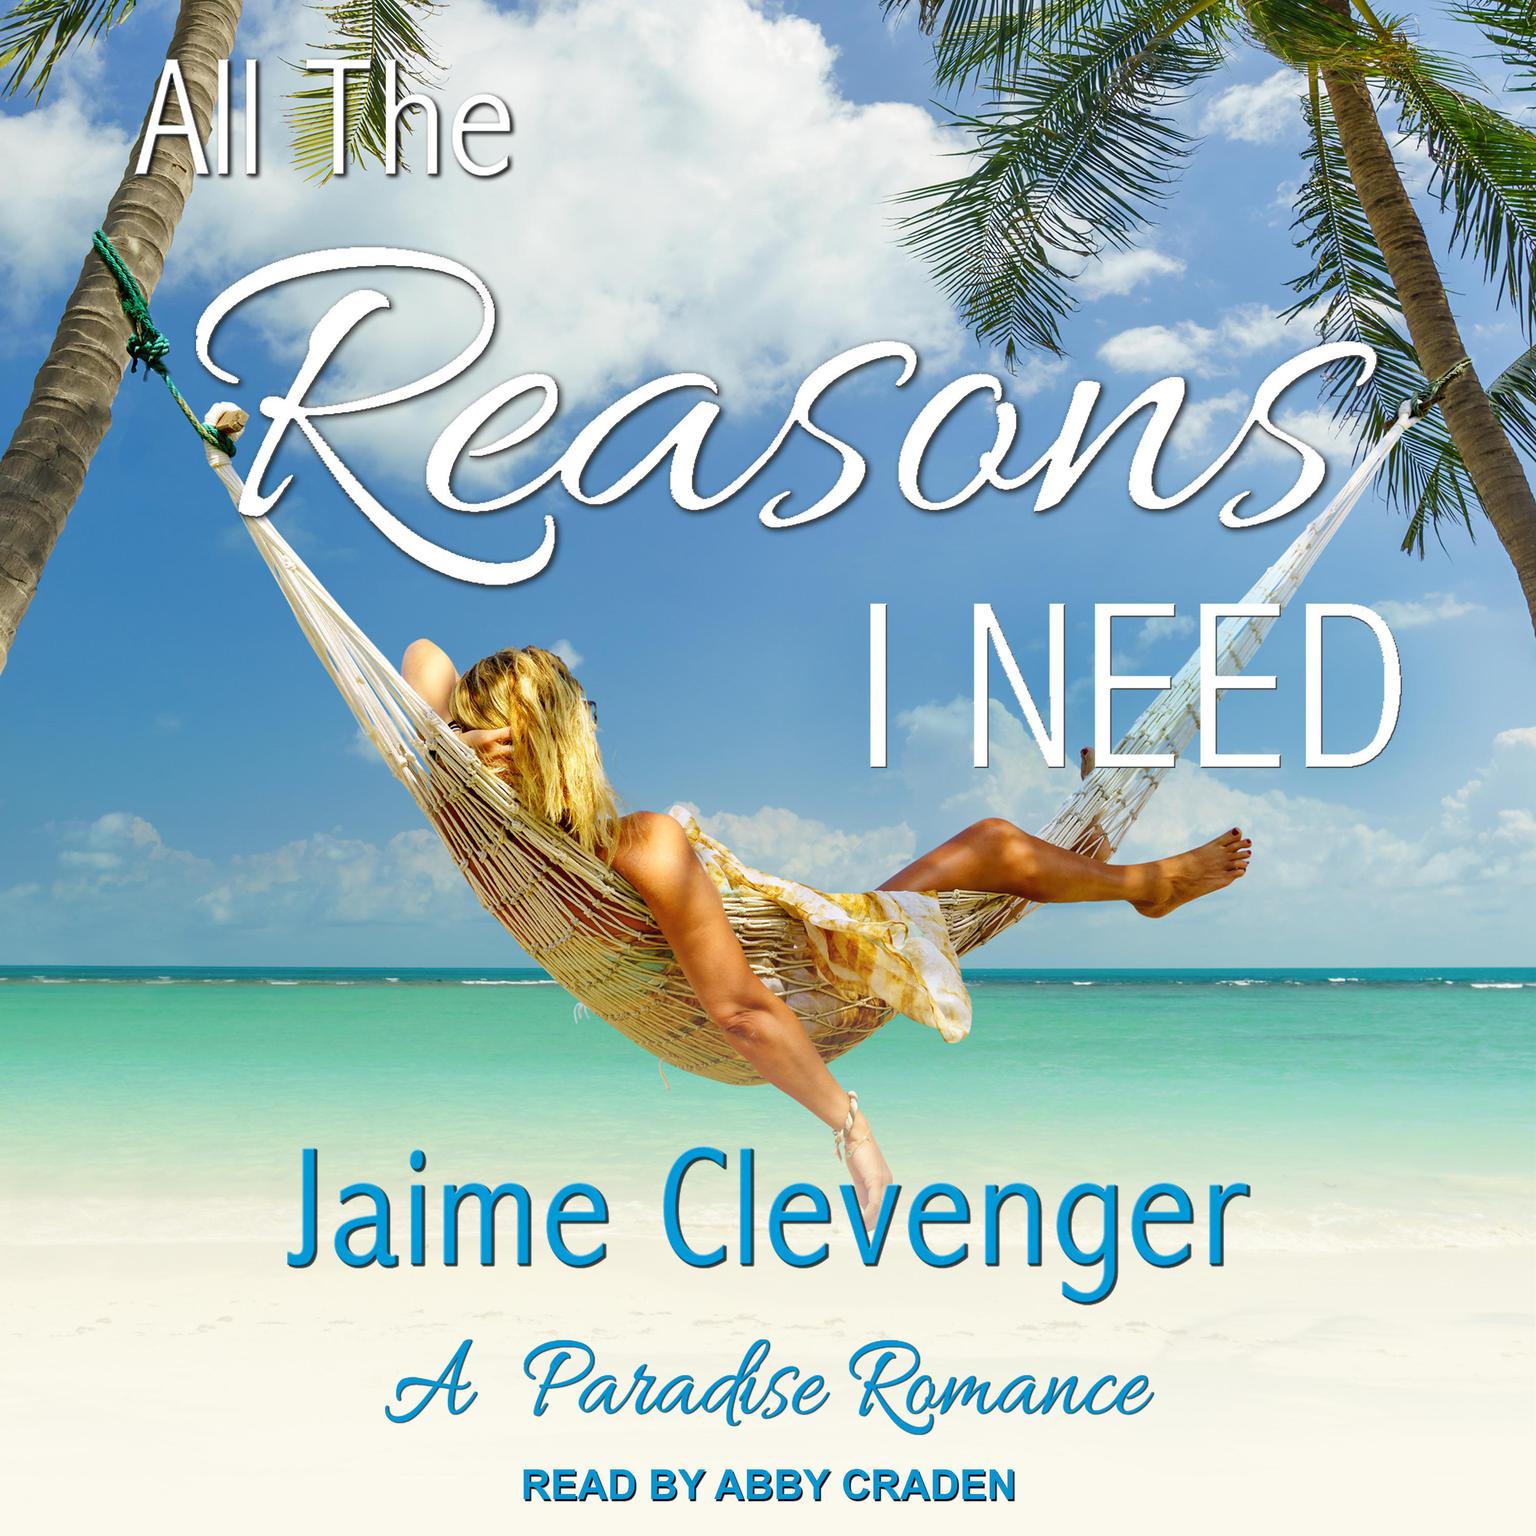 Jaime Clevenger: All the Reasons I Need (2019, Bella Books, Incorporated)